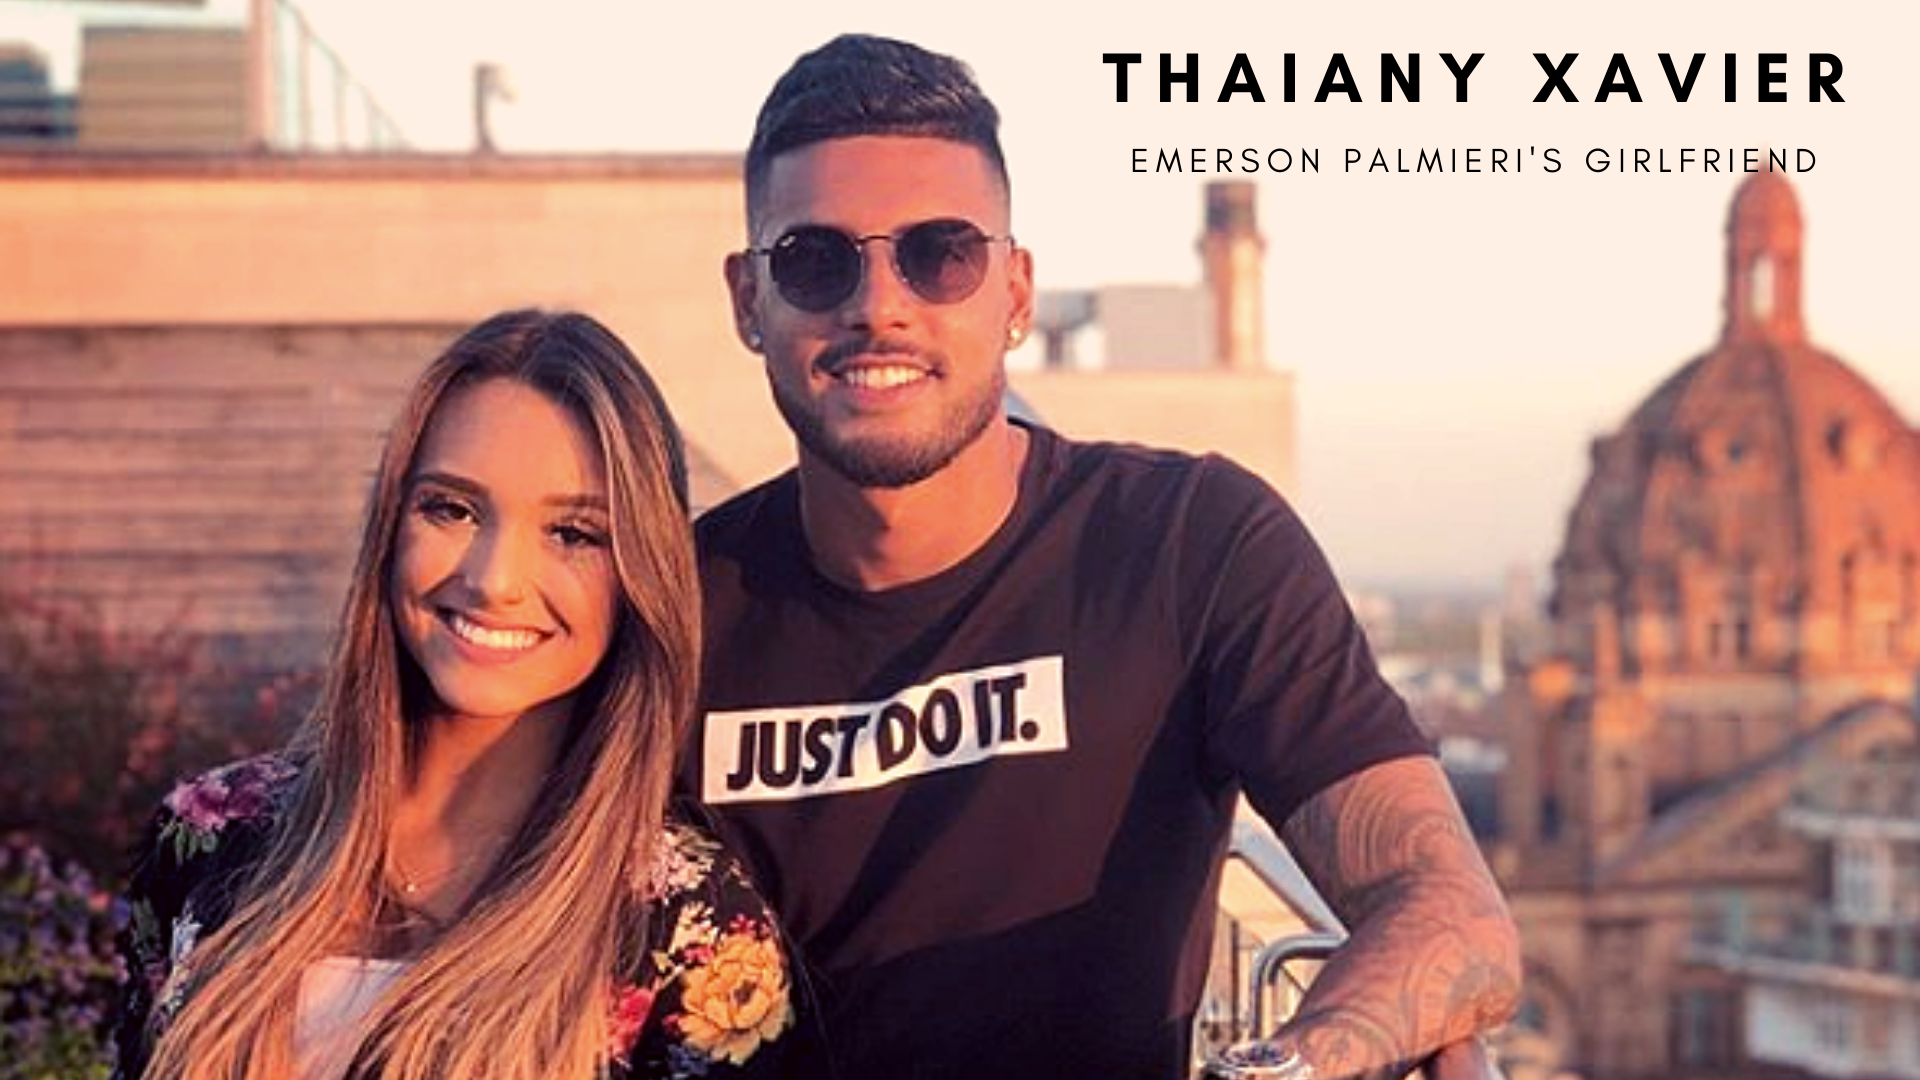 Emerson Palmieri with girlfriend Thaiany Xavier. (Picture was taken from Instagram)